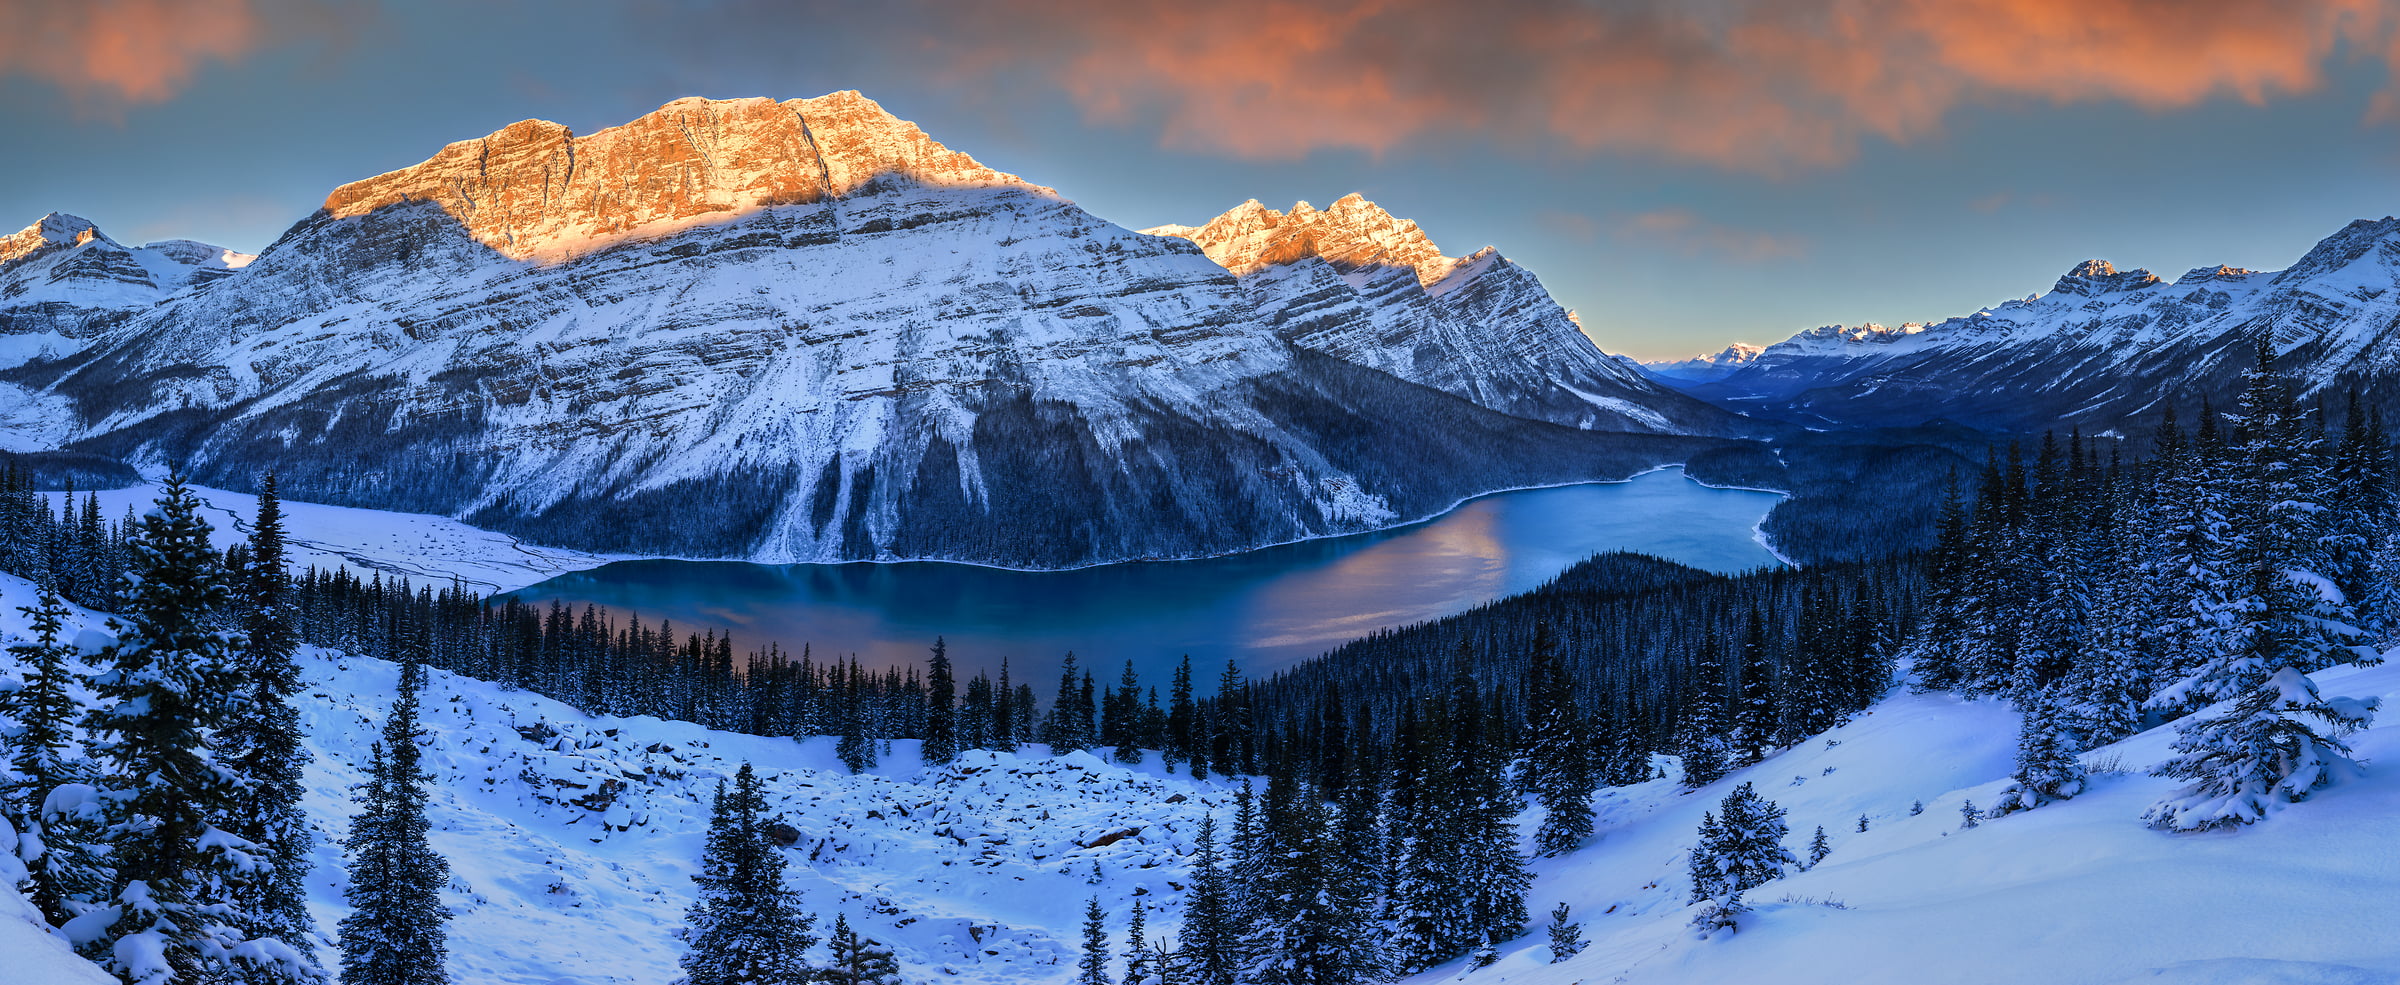 1,178 megapixels! A very high resolution, large-format VAST photo print of a snowy mountain landscape; wallpaper photograph created by Scott Dimond in Peyto Lake, Banff National Park, Alberta, Canada